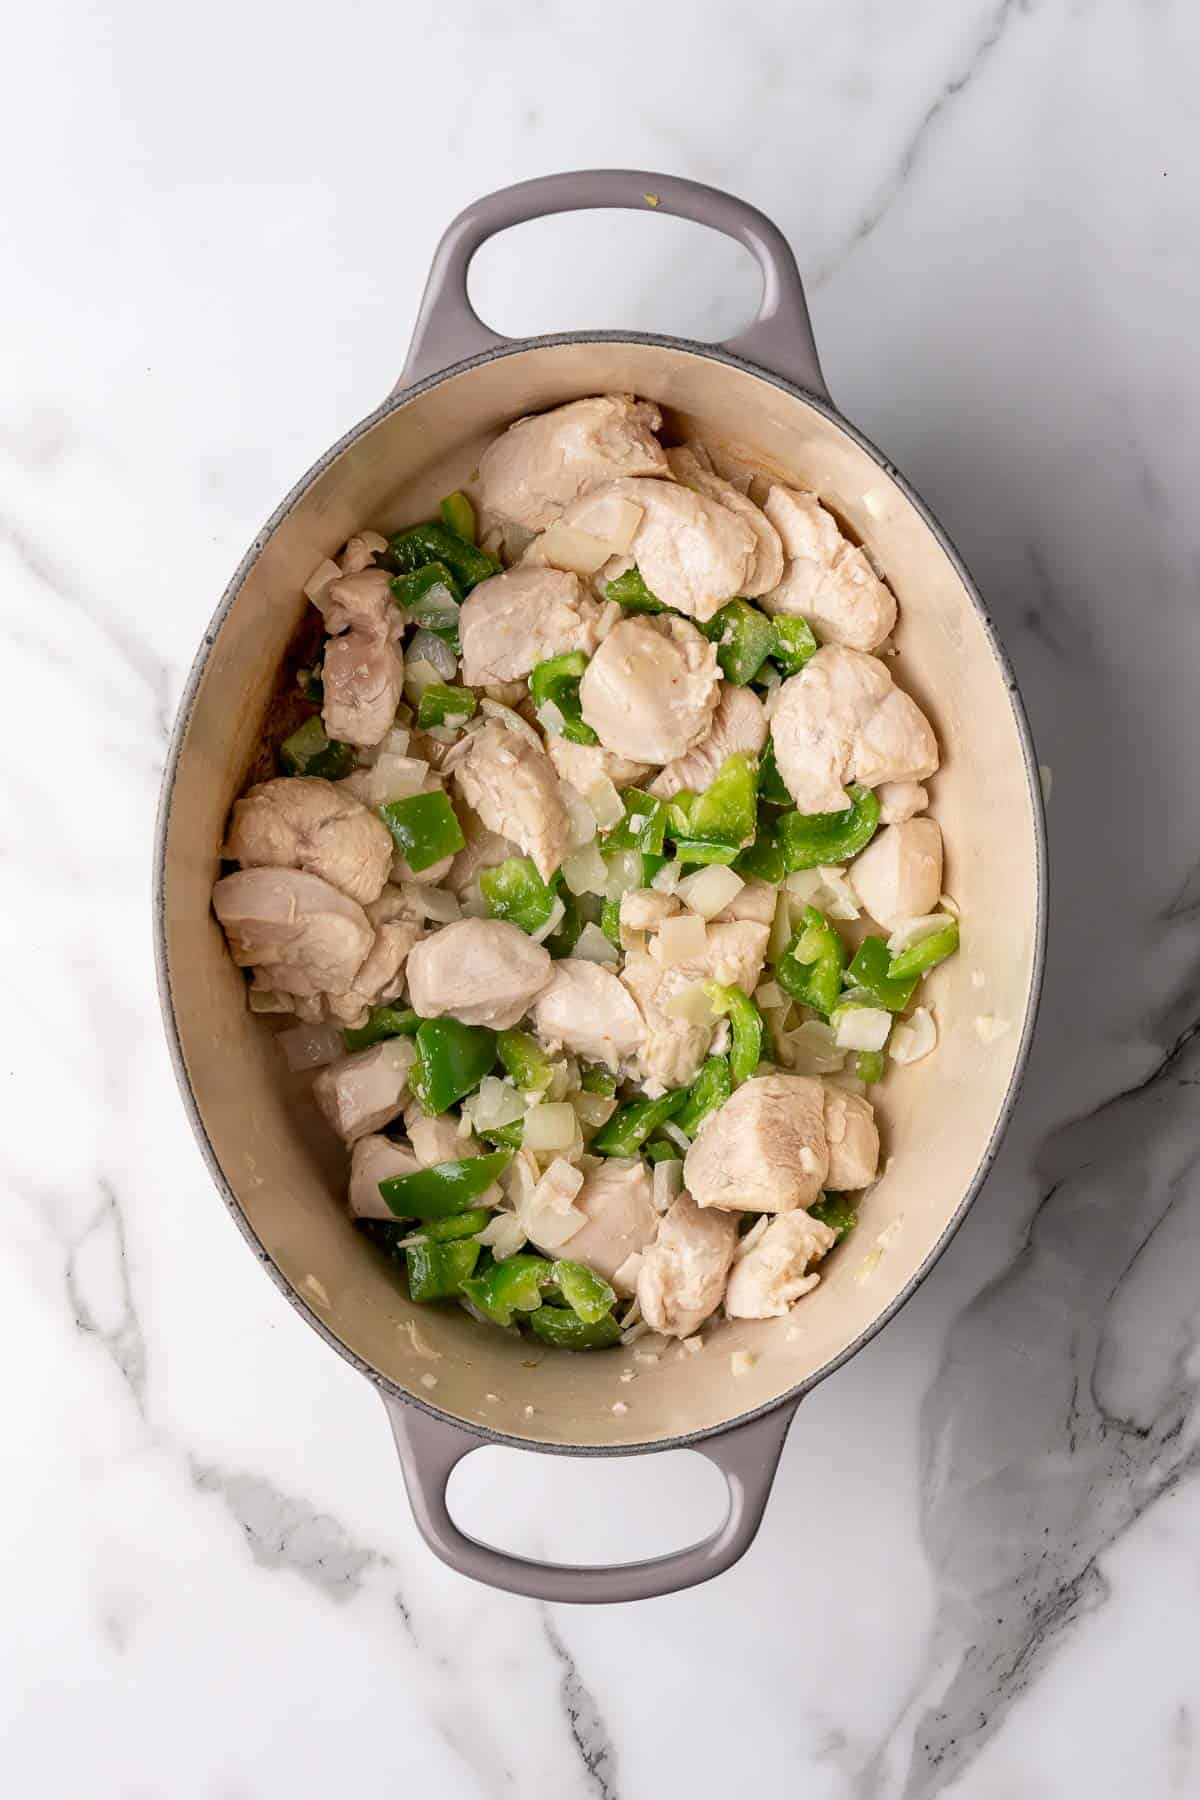 Chicken and vegetables in cooking pot